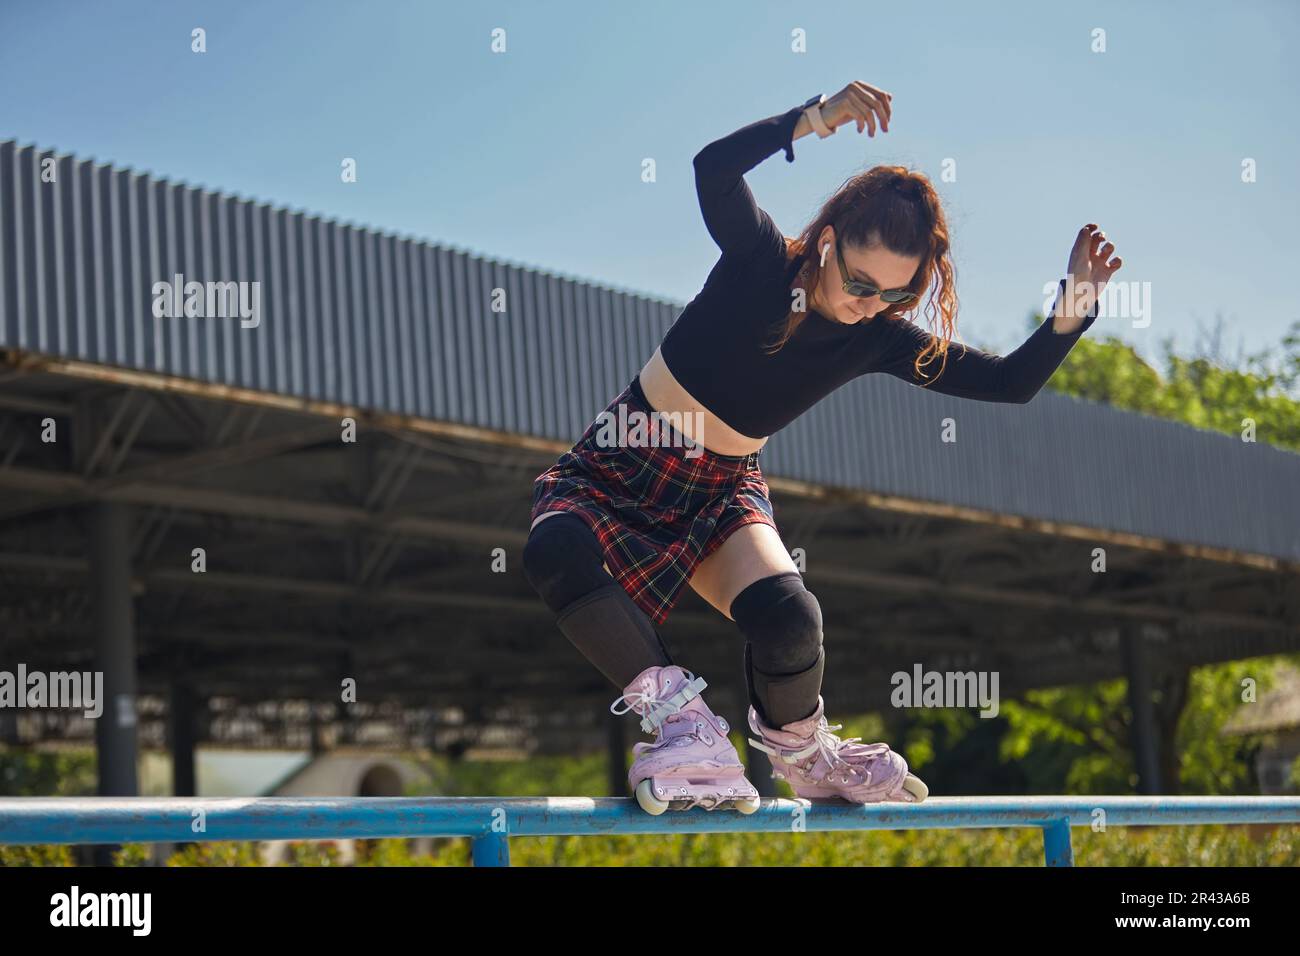 Inline roller blader female performing a miszou grind trick on a